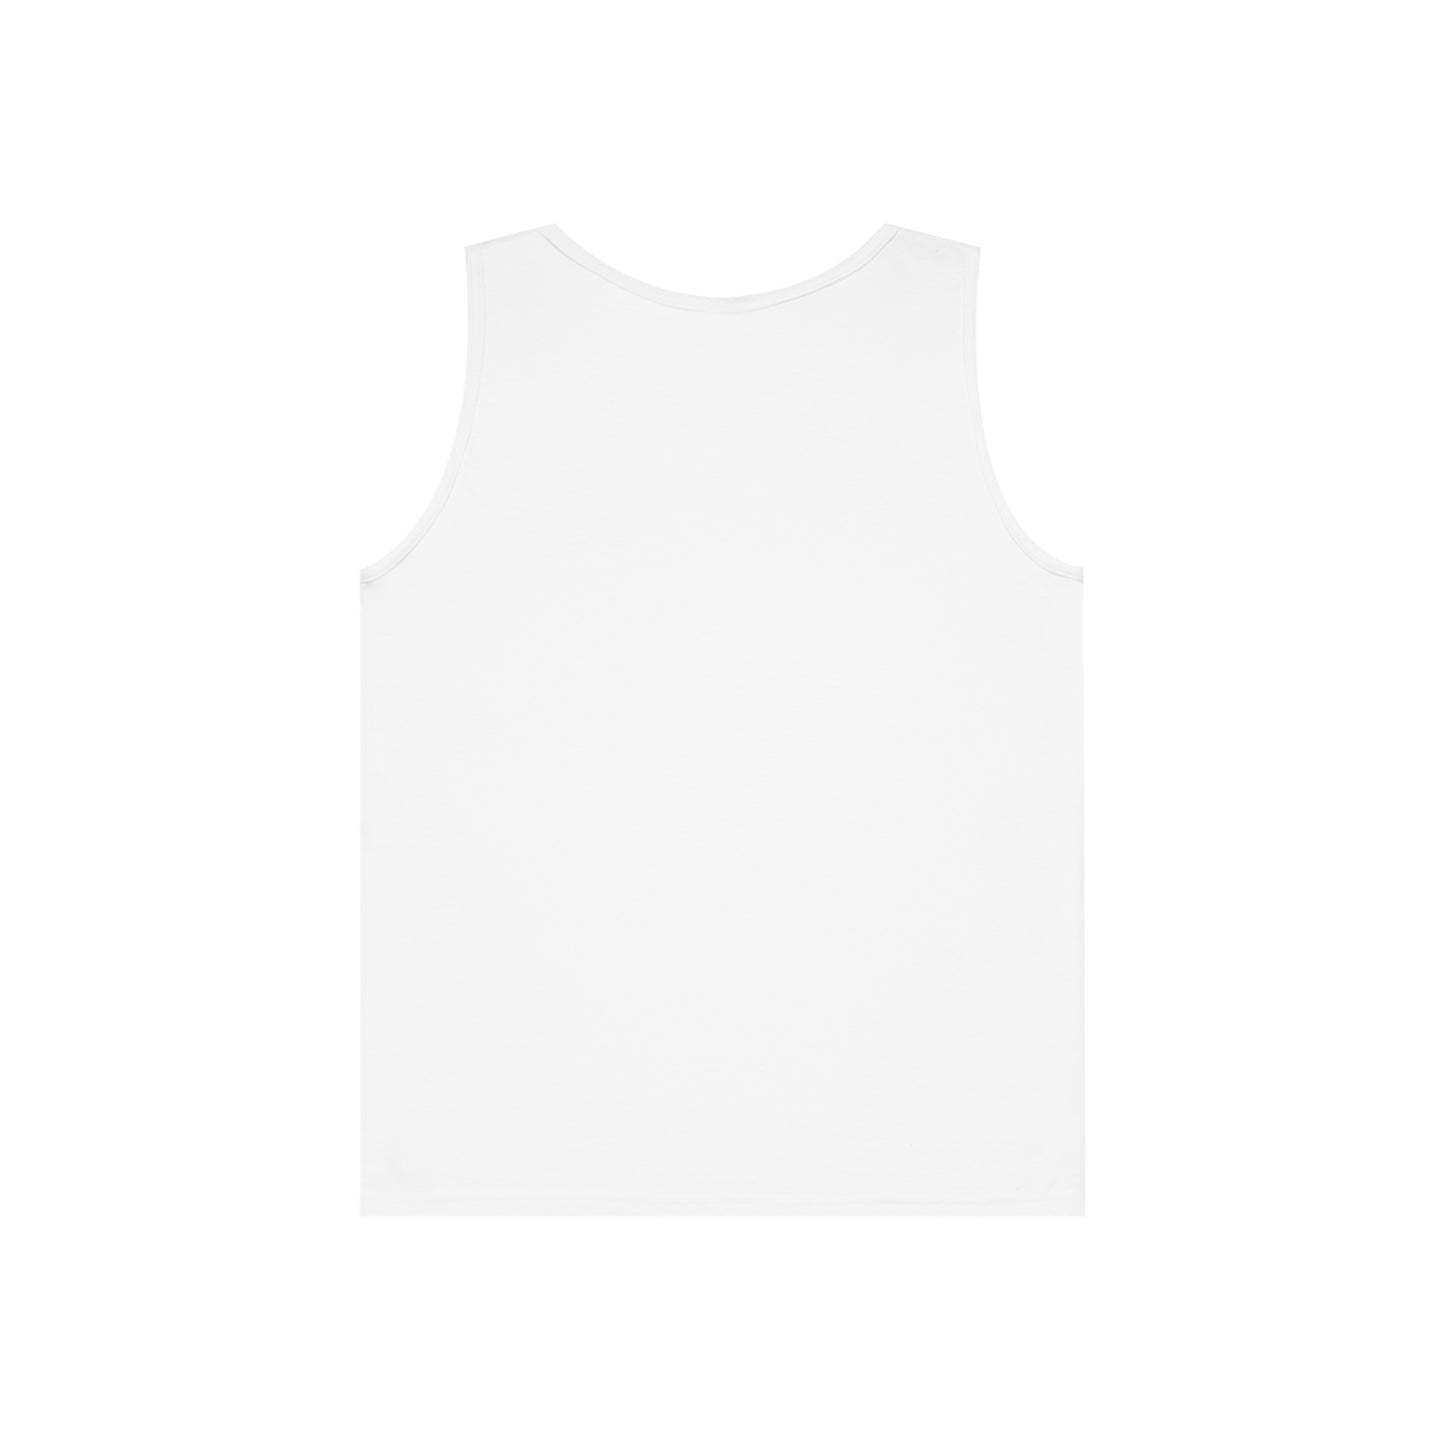 Hold that Plank! Tank Top